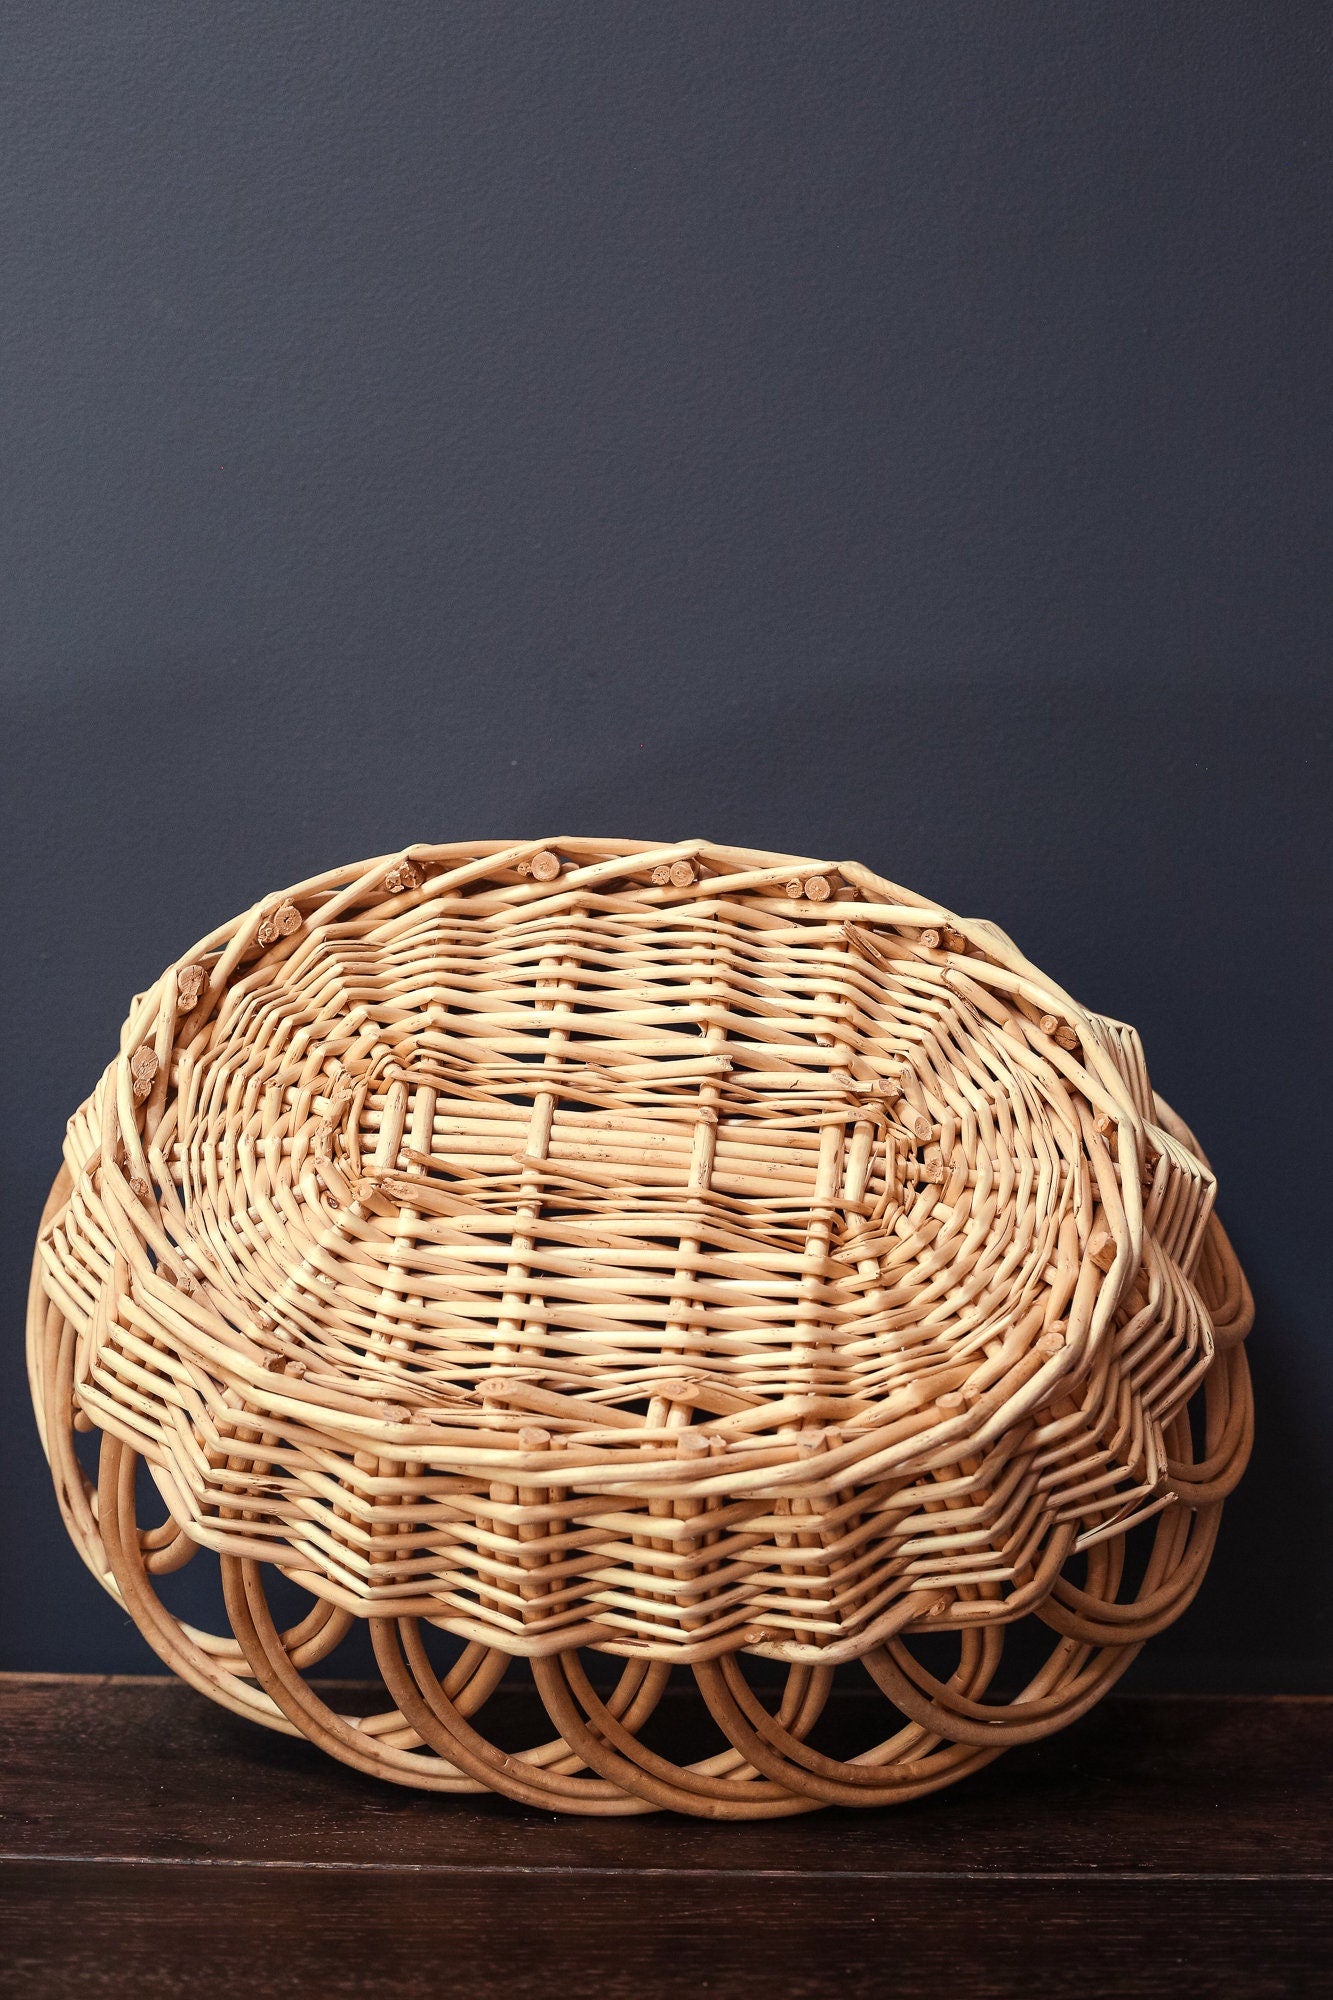 Large Oval Lace Edge Bleached Willow Branch Basket - Modern Farmhouse Console Basket